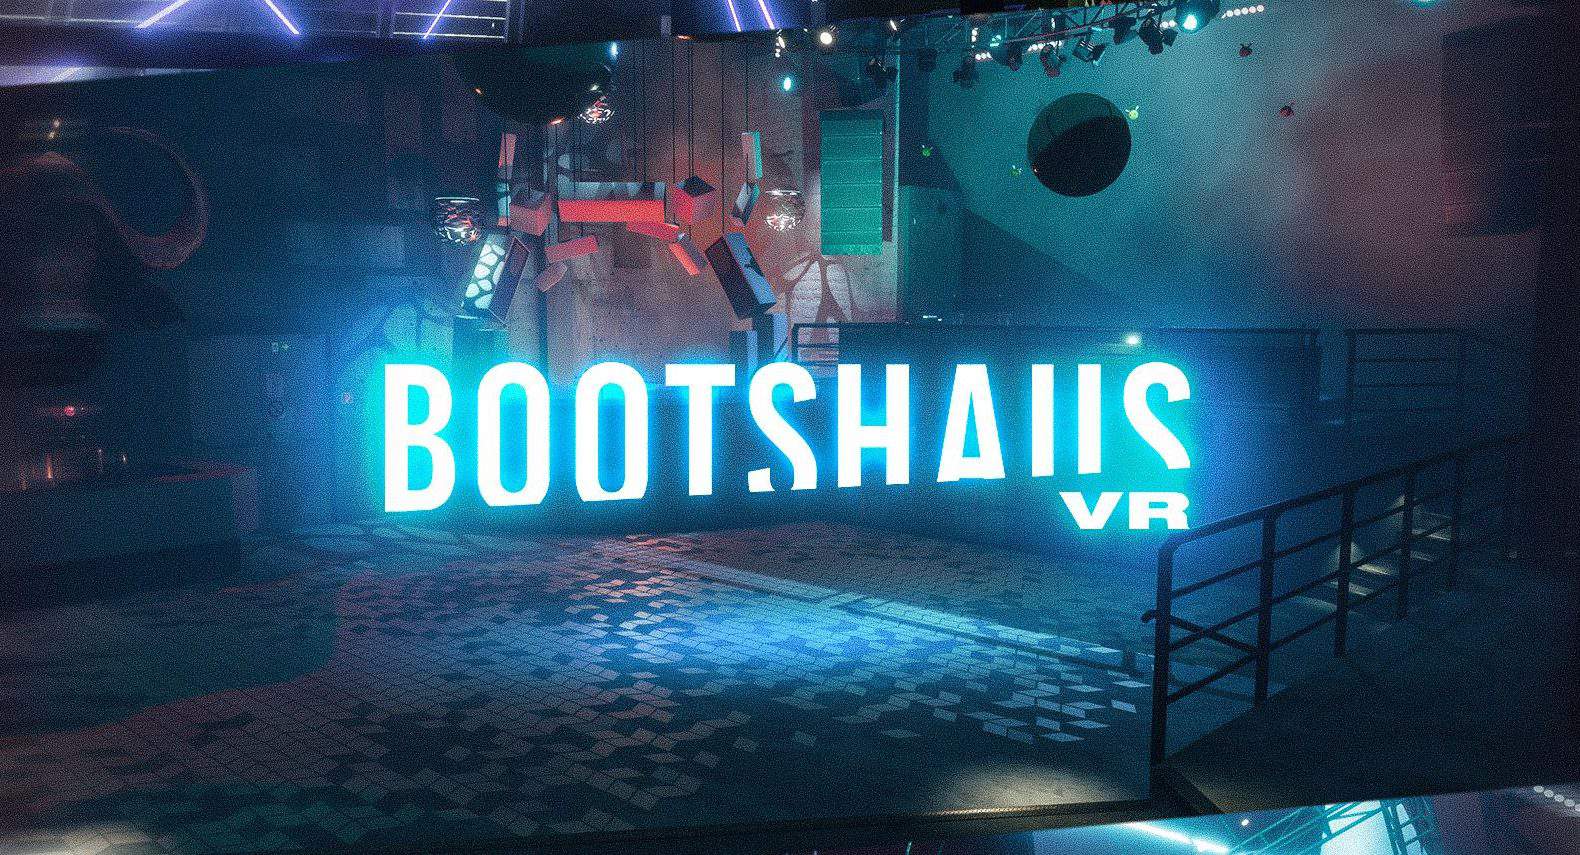 Germany’s iconic club Bootshaus launches VR experience